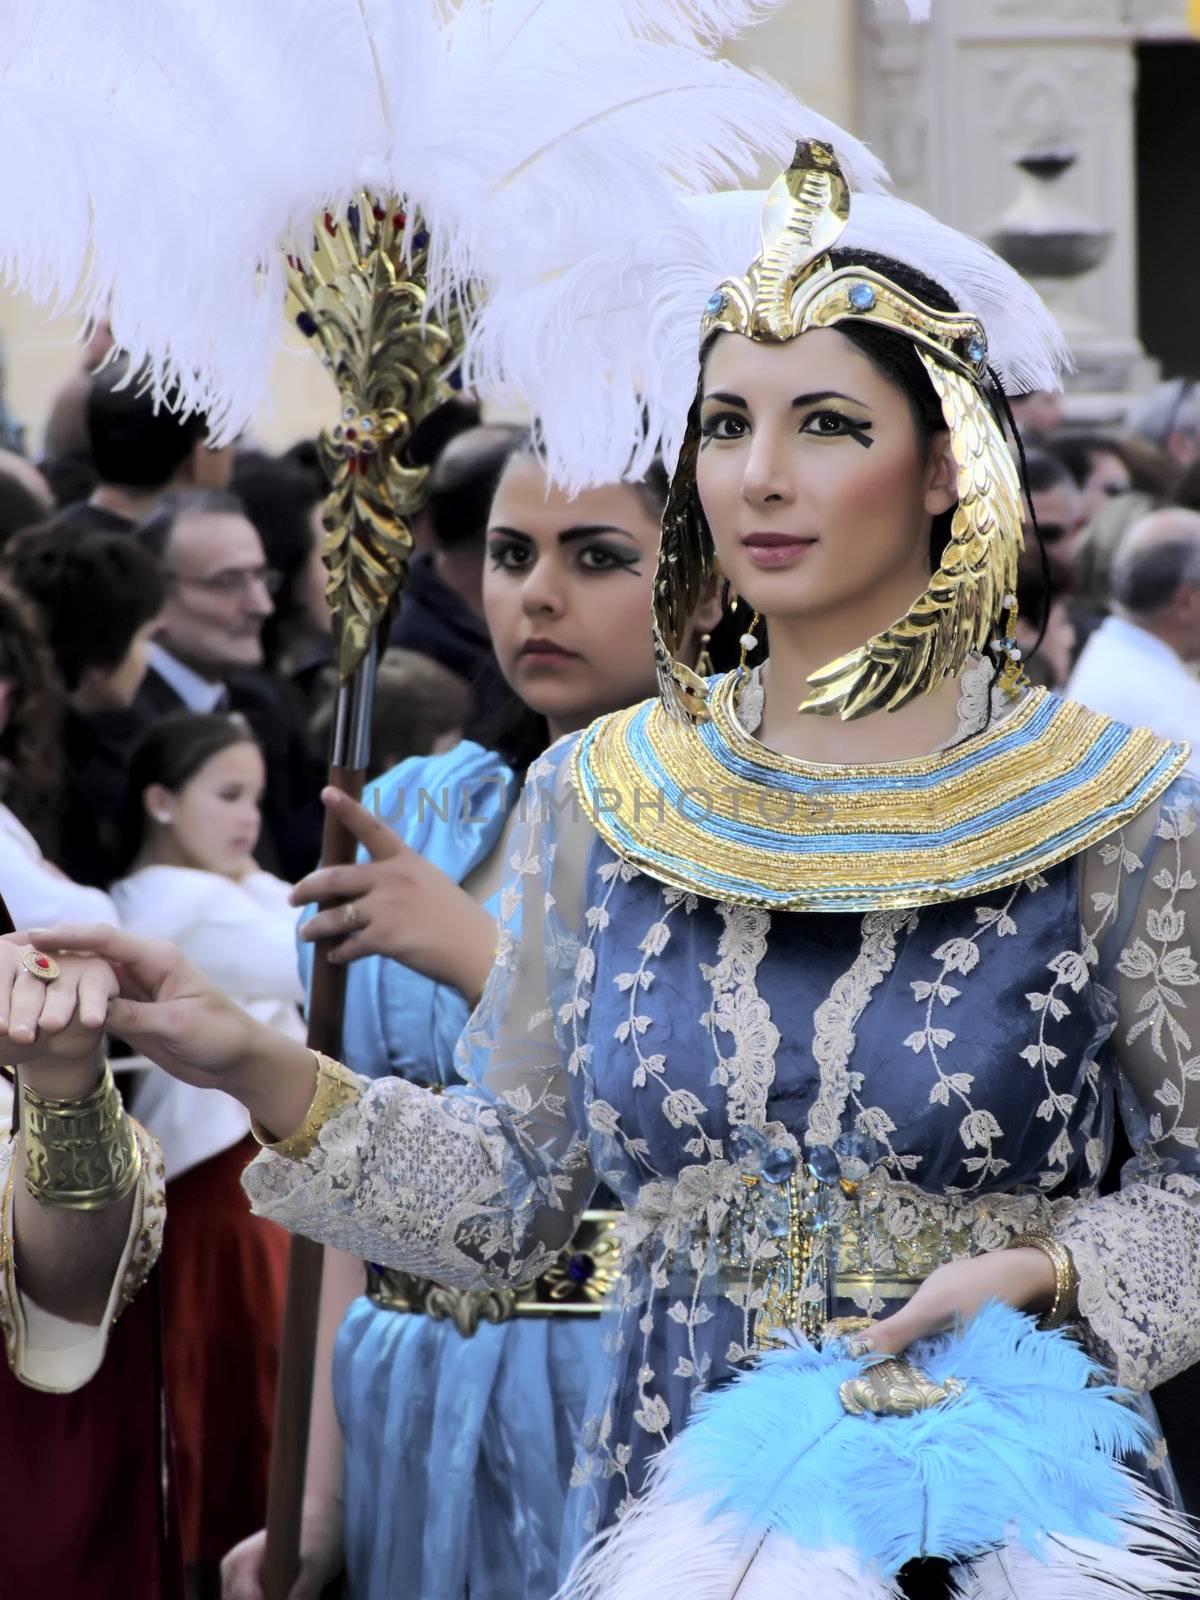 Beauties of the Ancient Empires - Images shot during parade demonstrating fashion and beauty of ancient empires of Rome, Egypt, Judea, etc